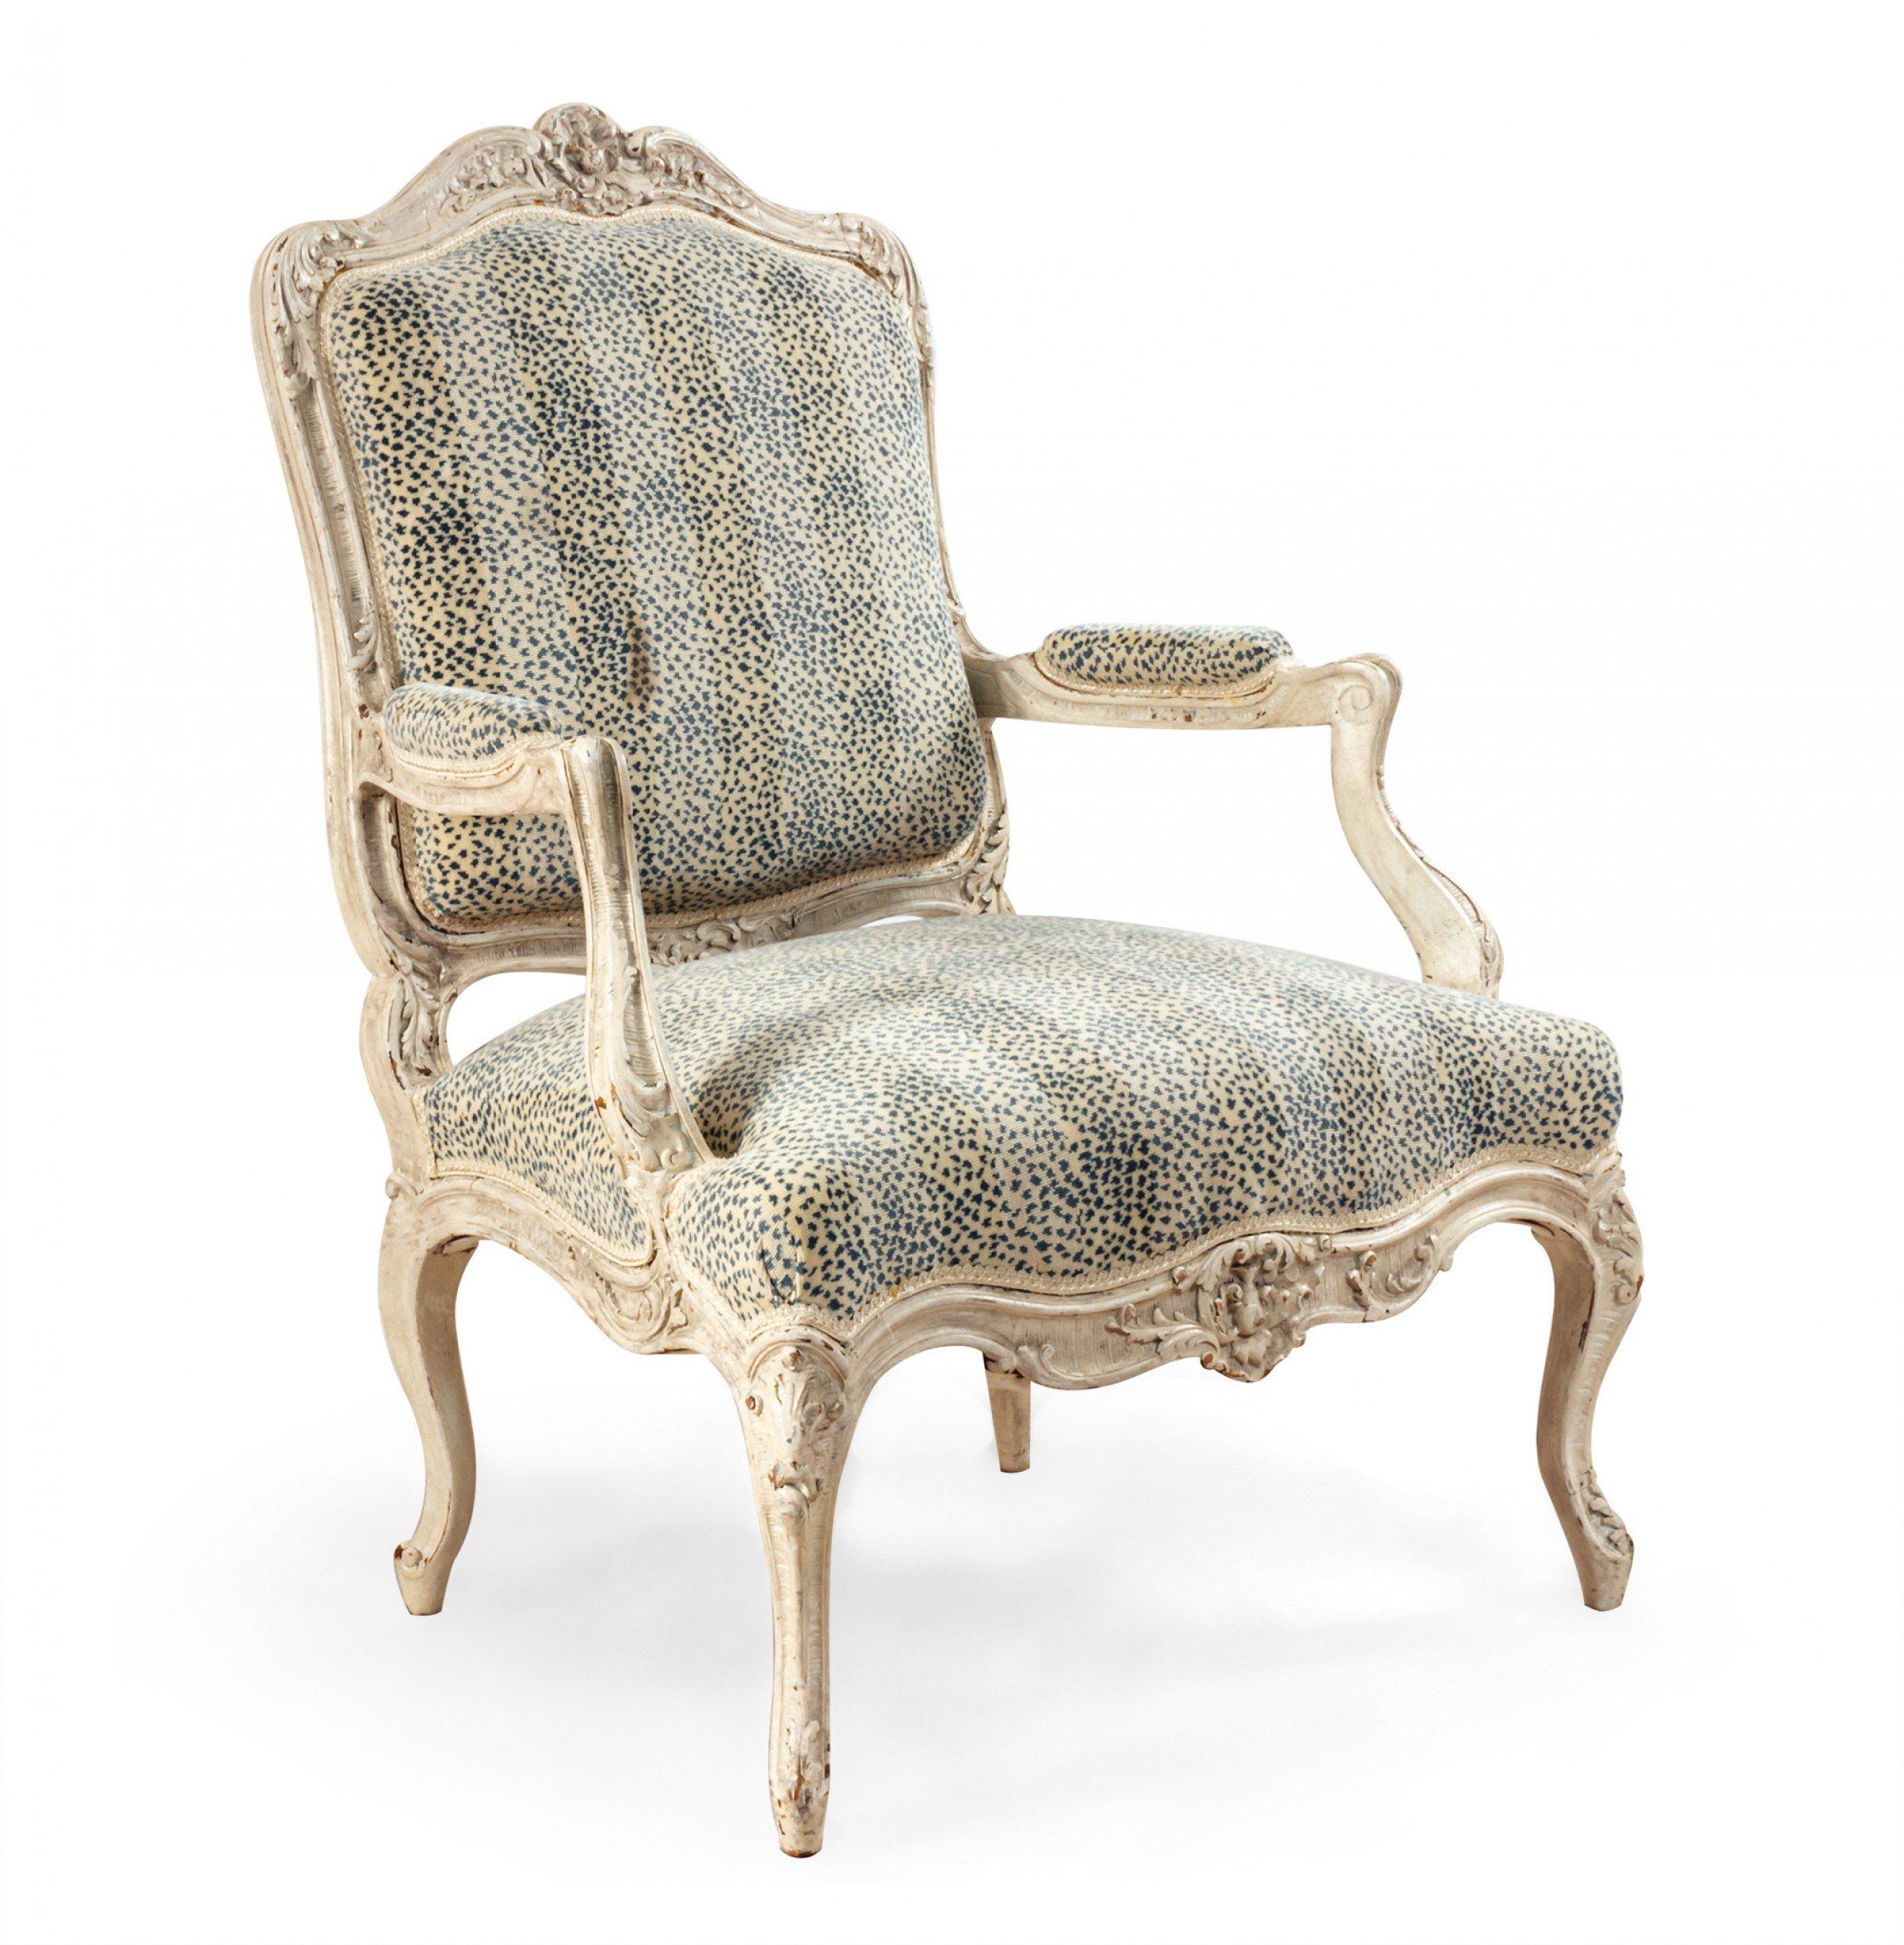 Pair of Cream Louis XV Style Carved Open Armchairs with Leopard Upholstery In Good Condition For Sale In New York, NY